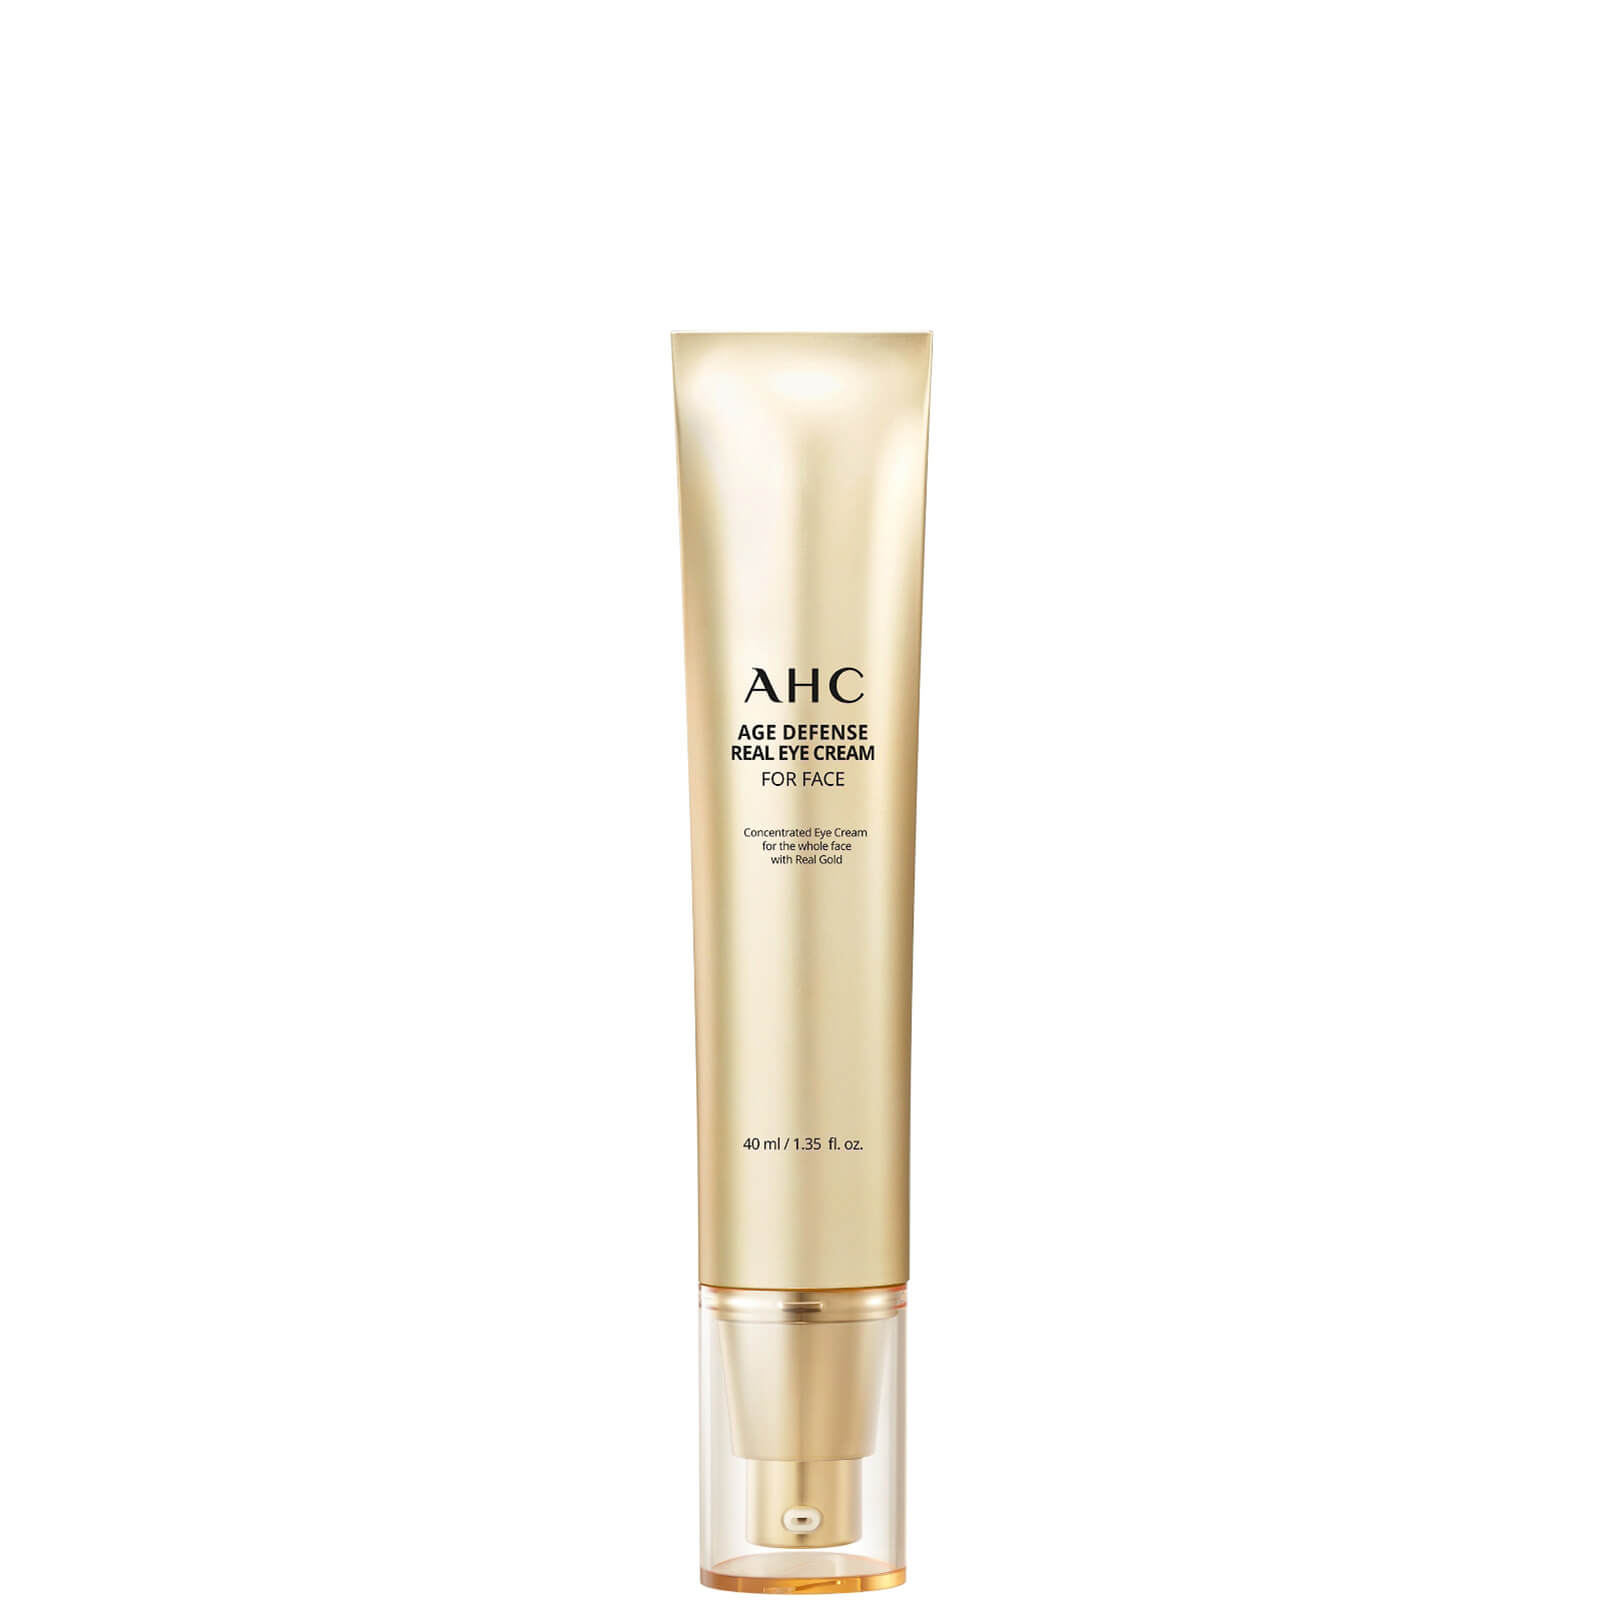 Image of AHC Age Defense Real Eye Cream for Face 40ml